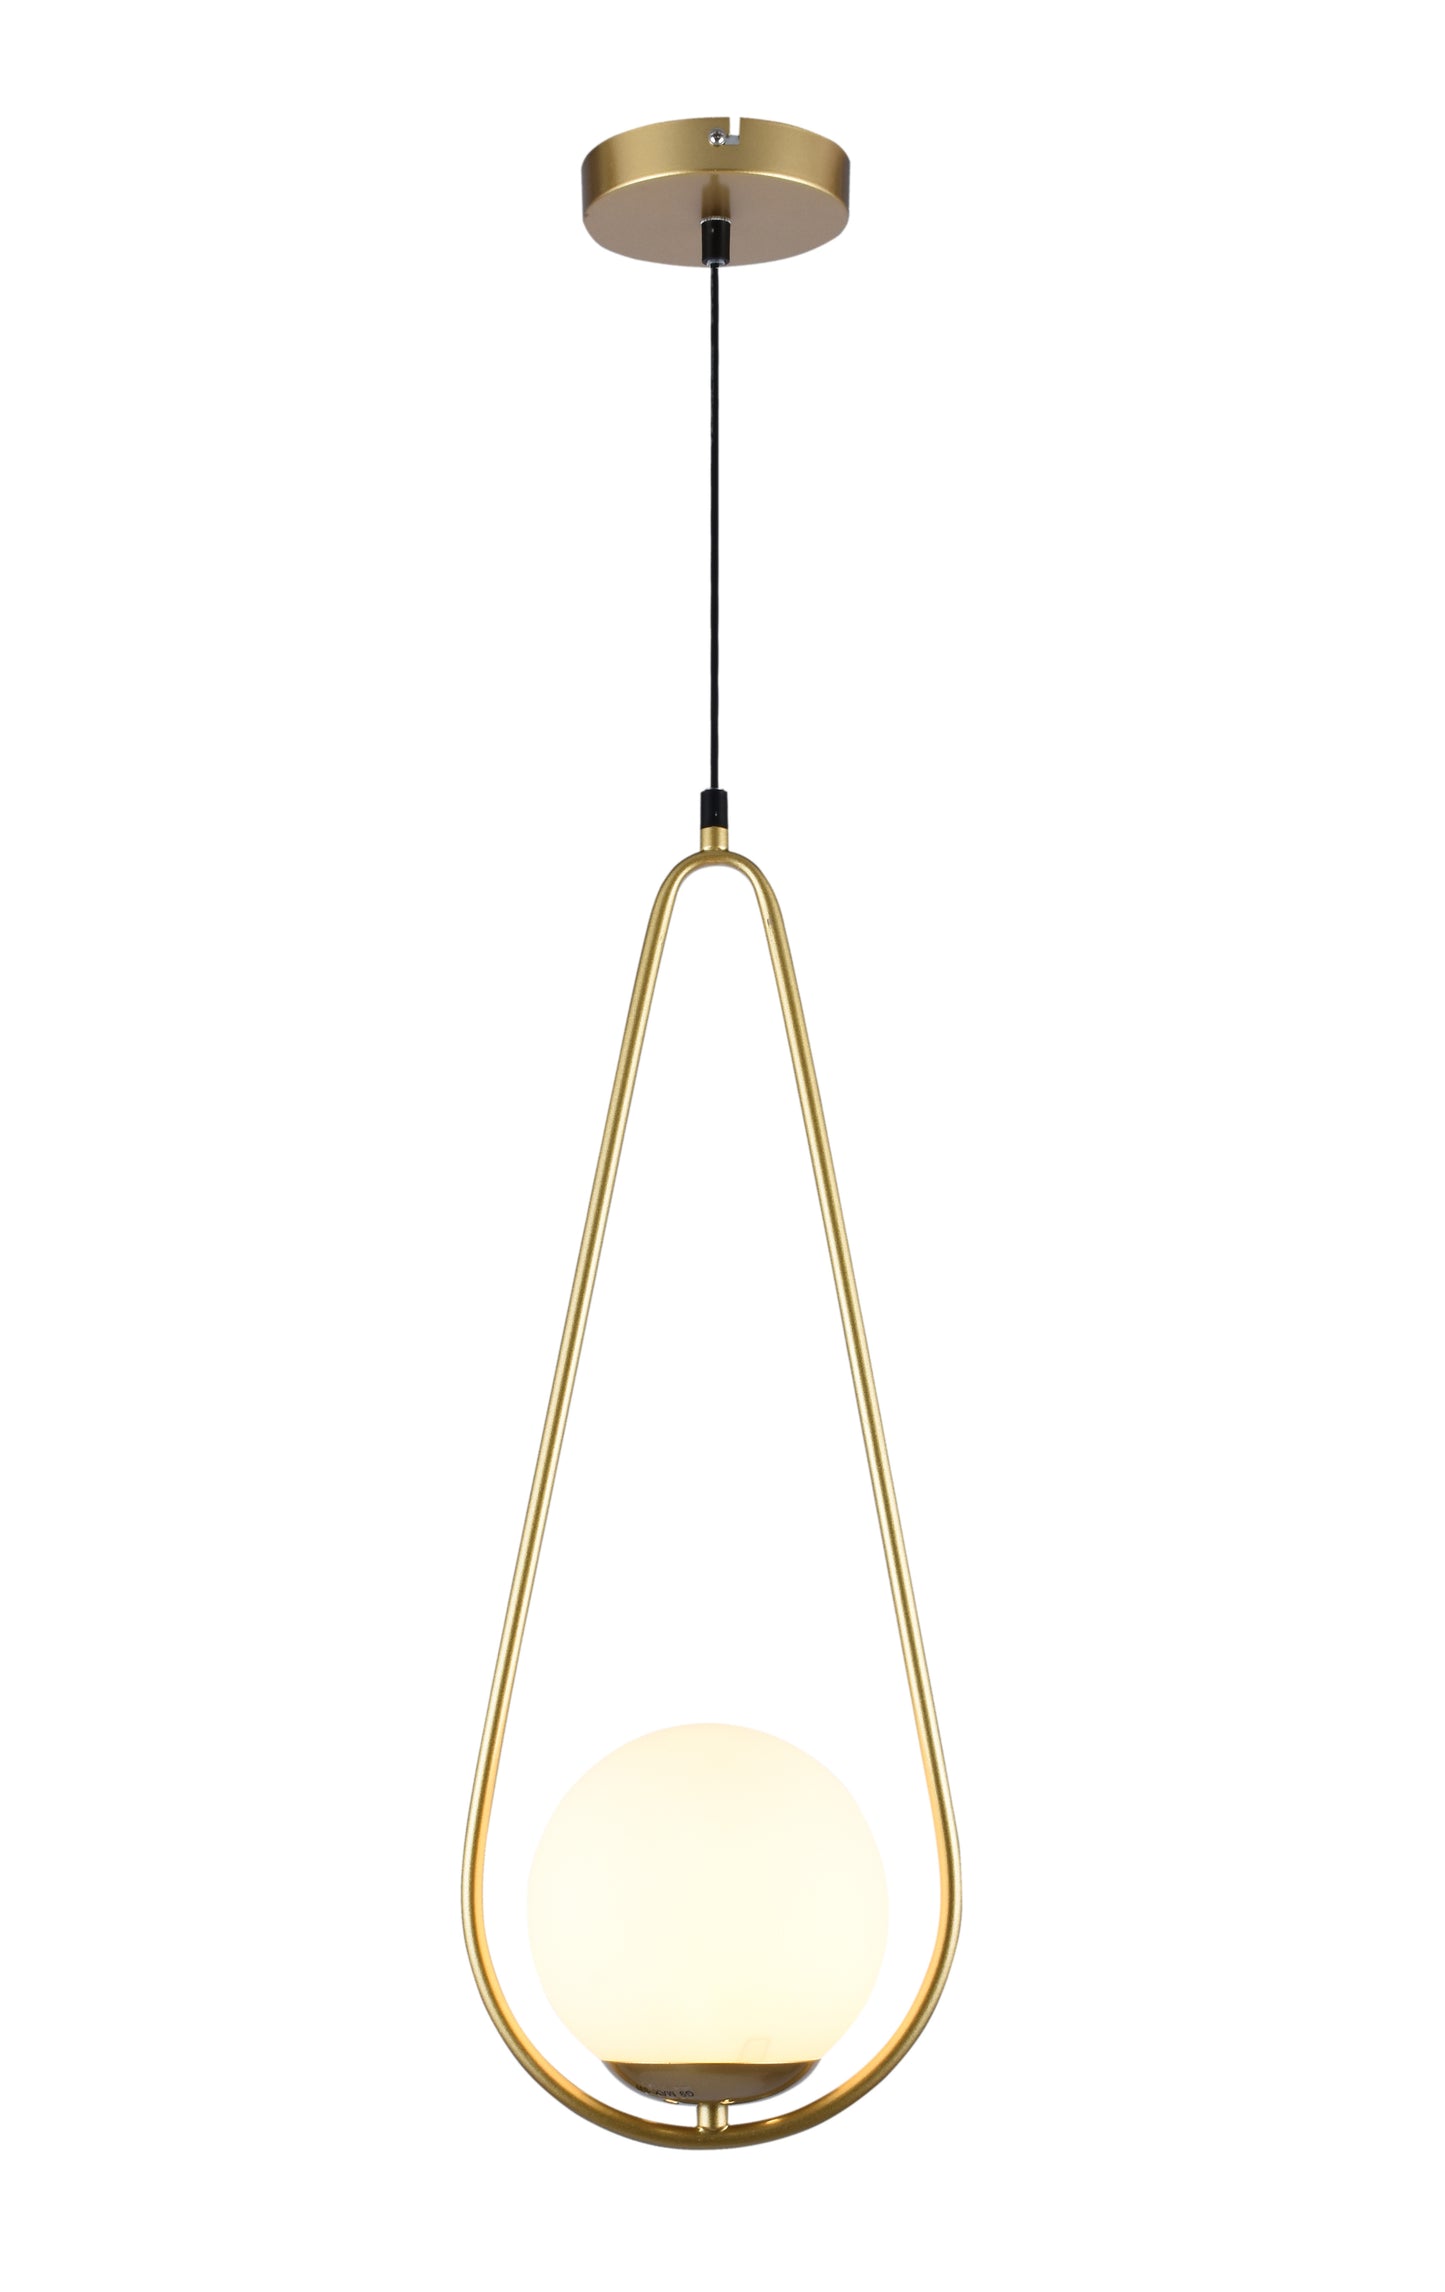 The Lopez ceiling pendant light is a contemporary addition to your home decor. This adjustable brushed gold brass ceiling pendant light with pearl white glass globe ball is perfect to add style and elegance to any room.